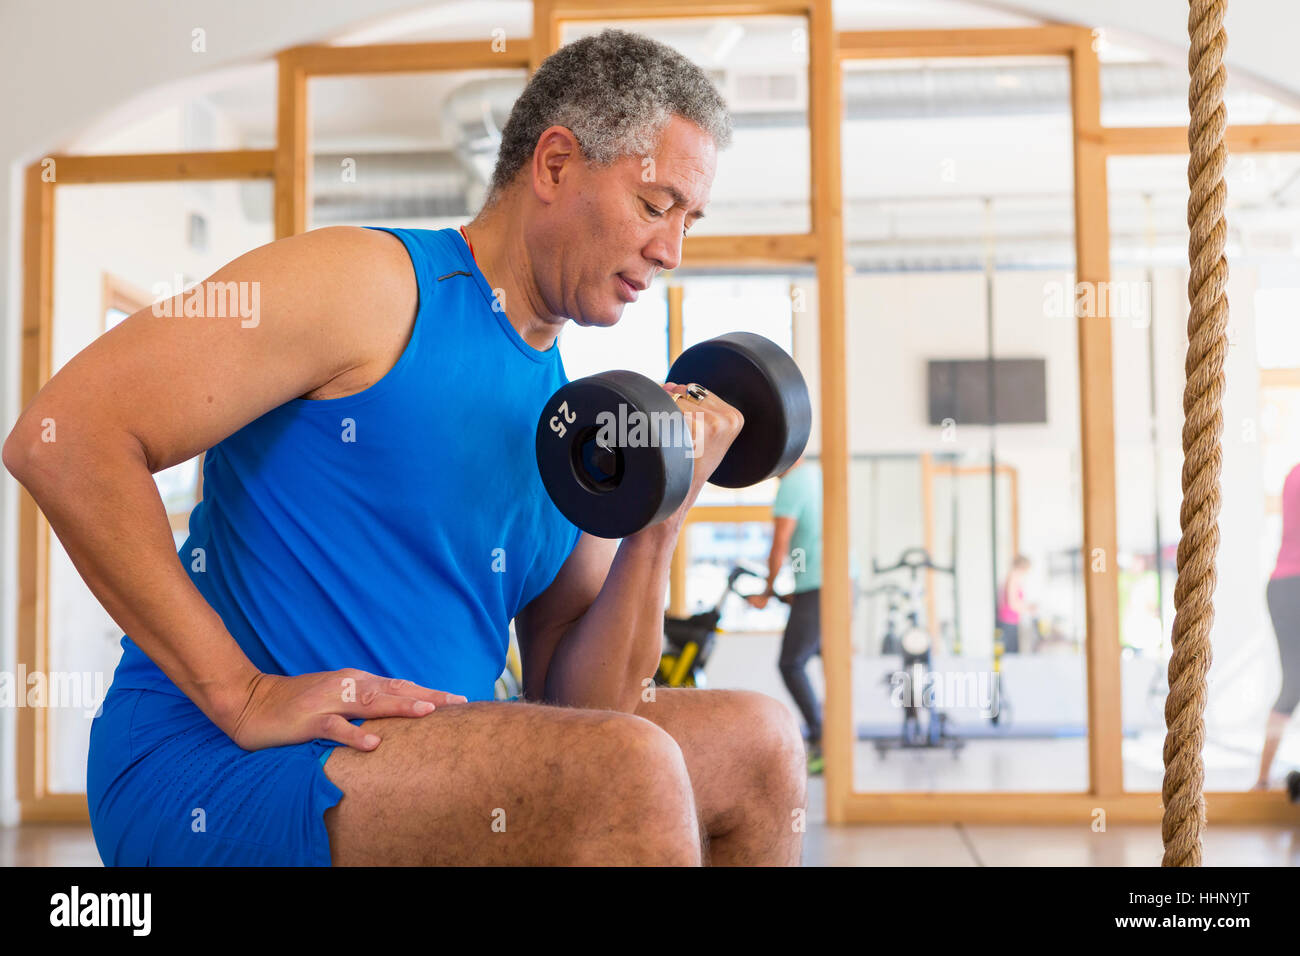 Mixed Race man curling dumbbell in gymnasium Stock Photo